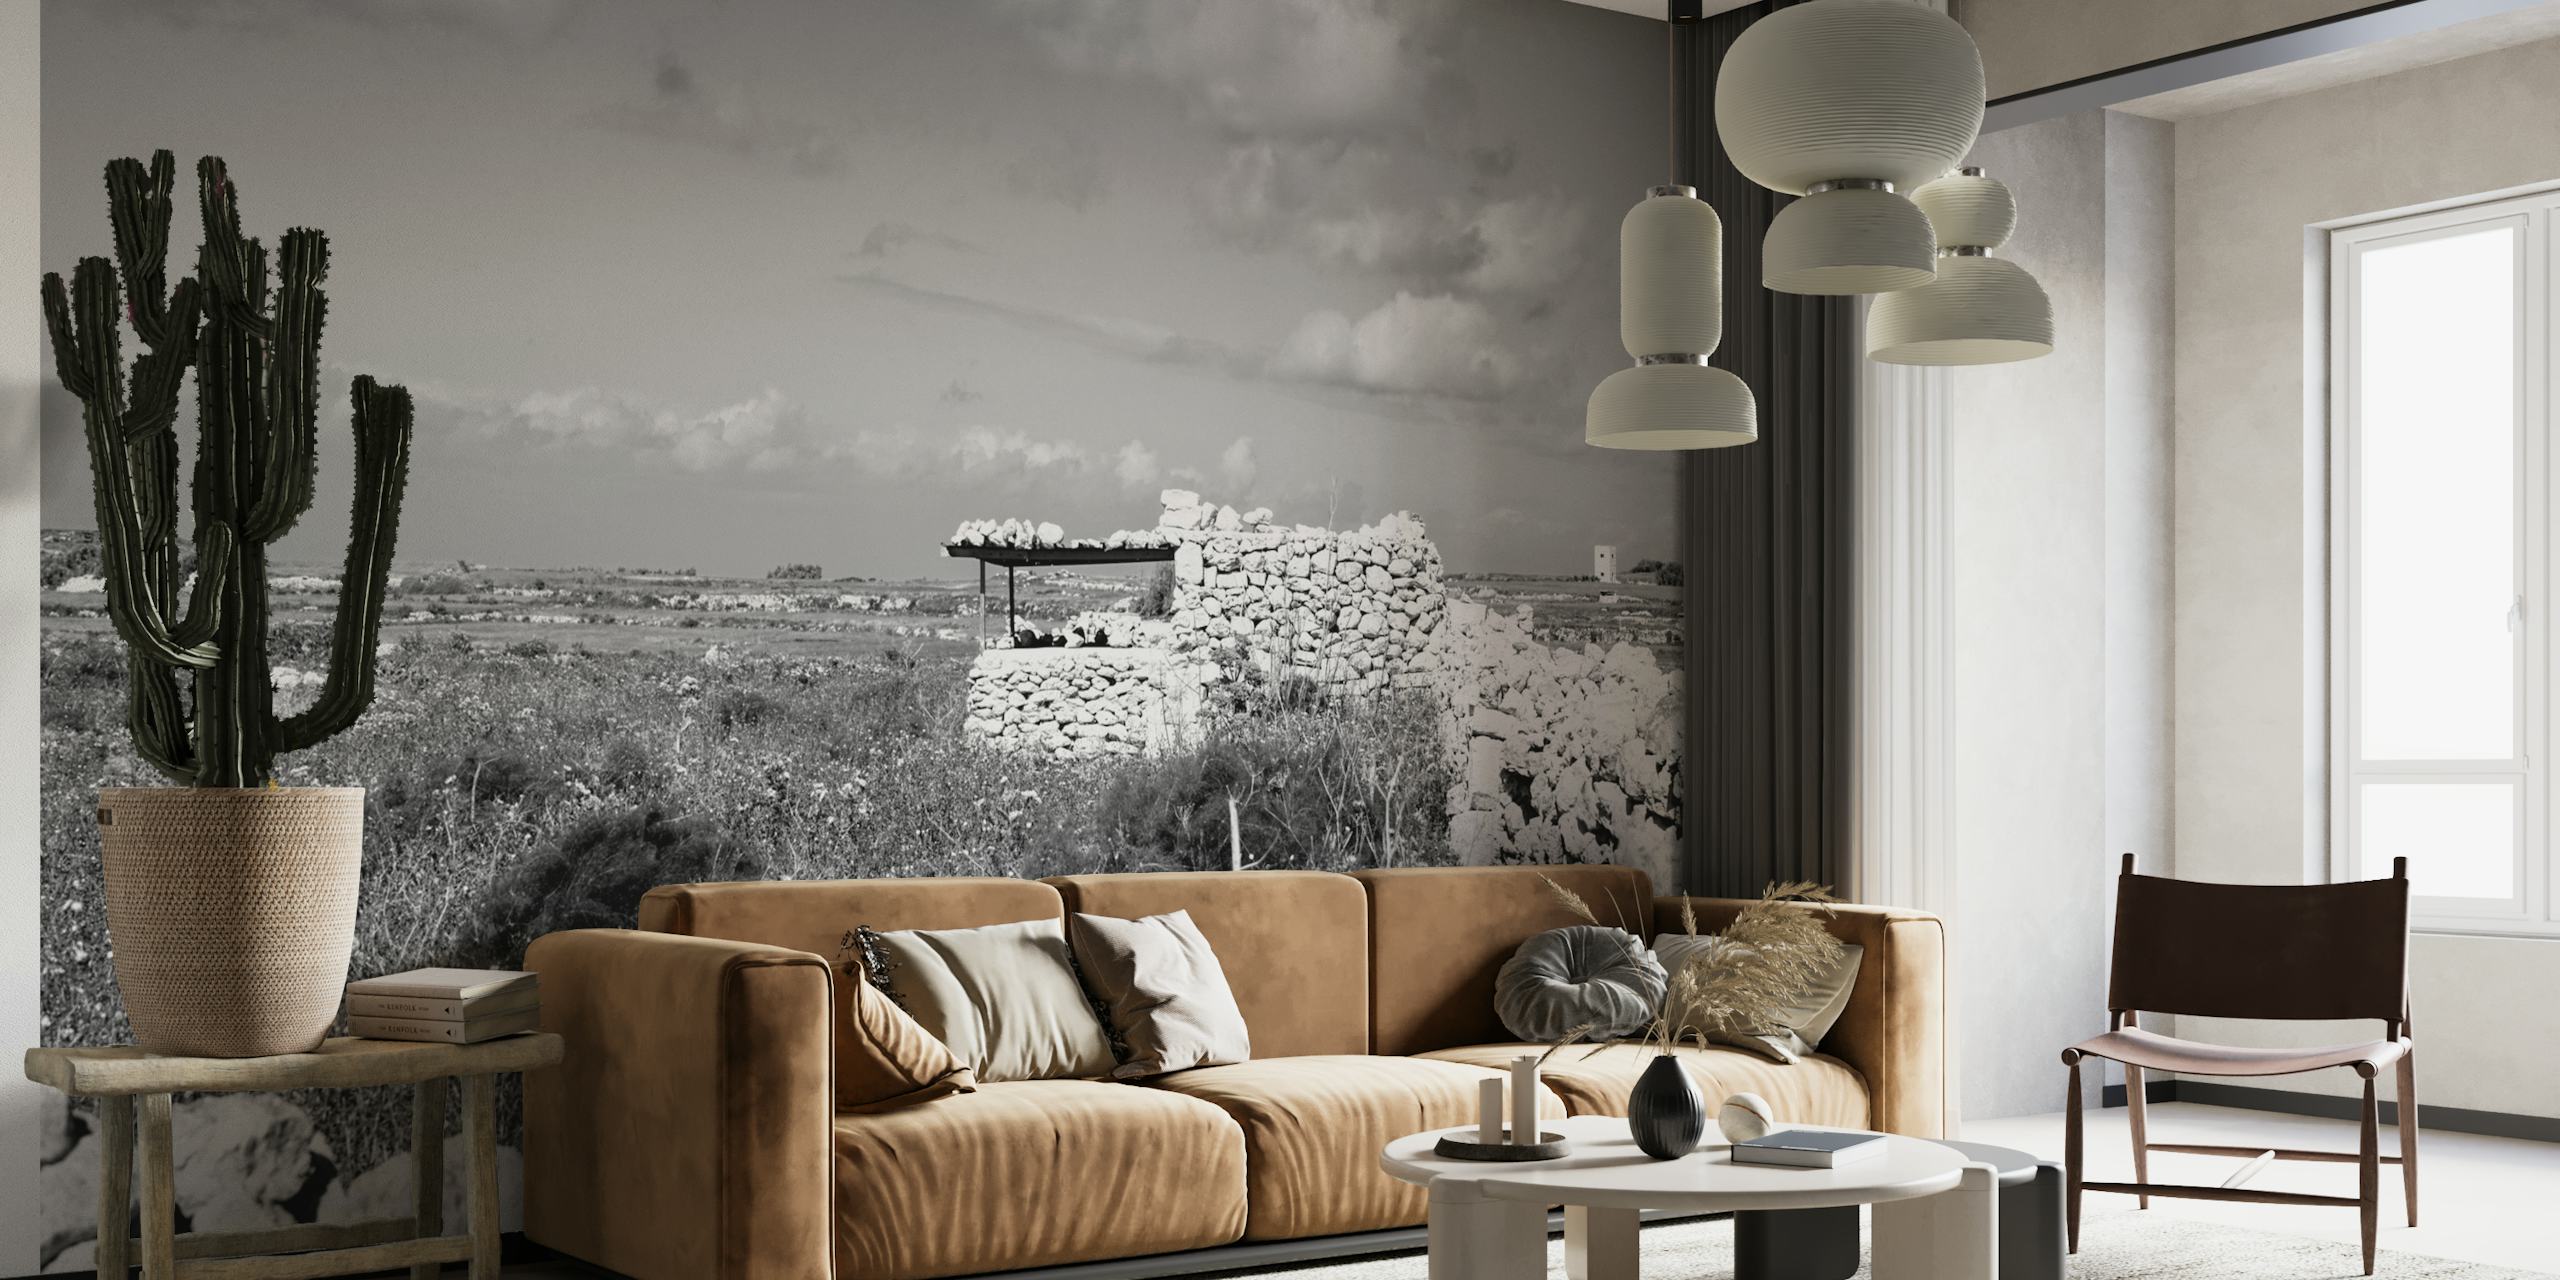 Black and white wall mural of a small, isolated home amidst a natural landscape